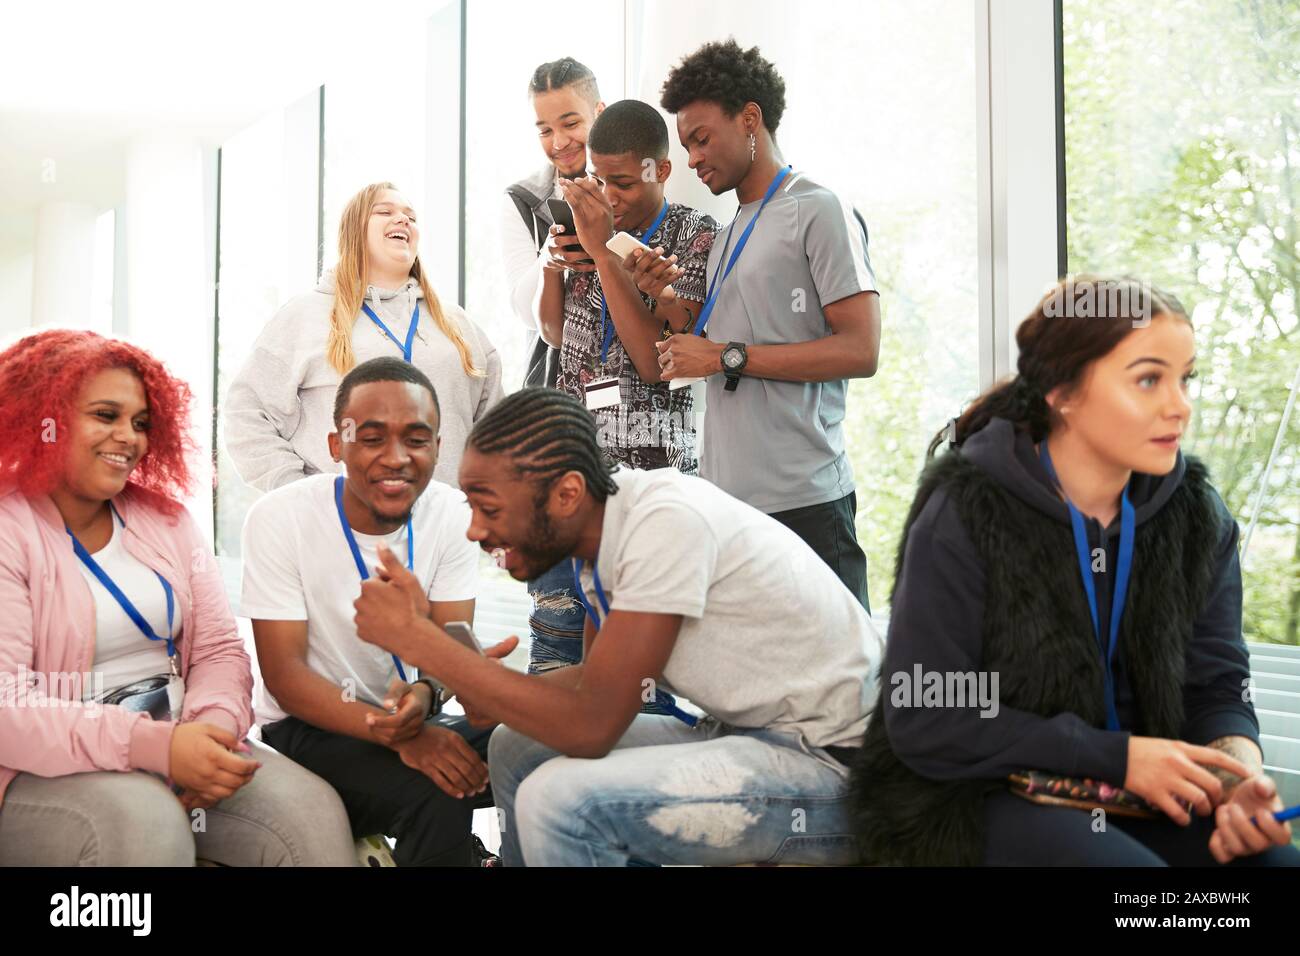 College students using smart phones and hanging out Stock Photo